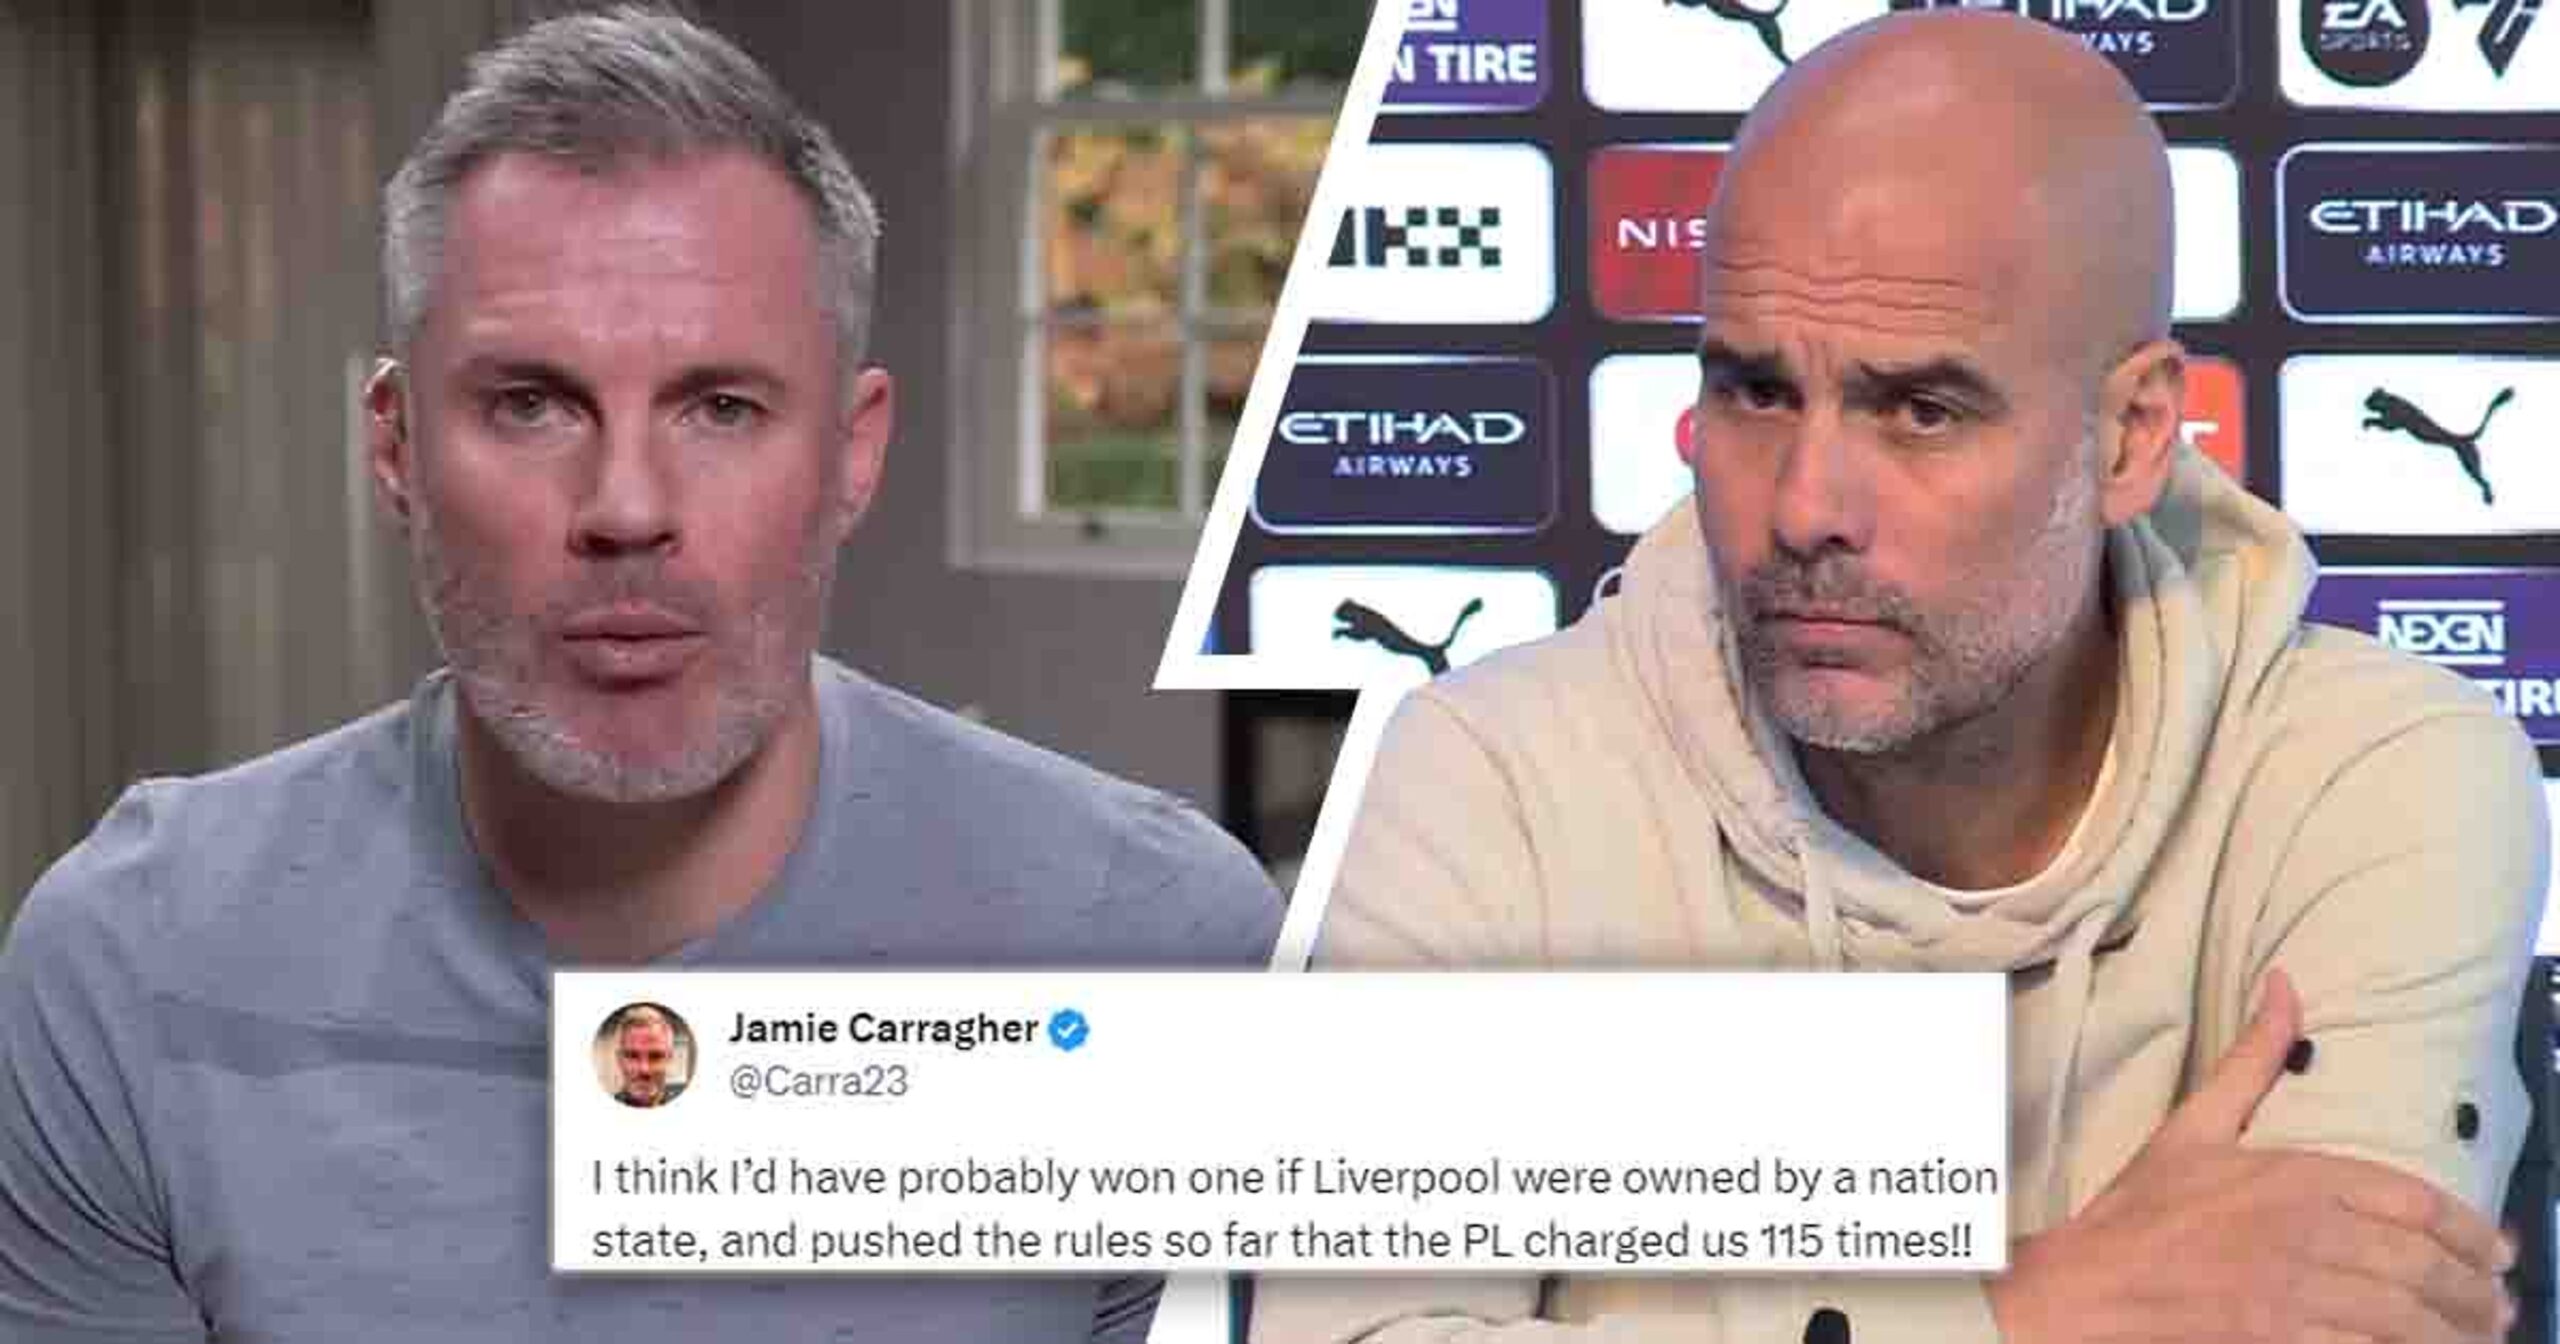 Fireworks Erupt As Carragher And Guardiola Lock Horns While Neville And Richards Catch Strays